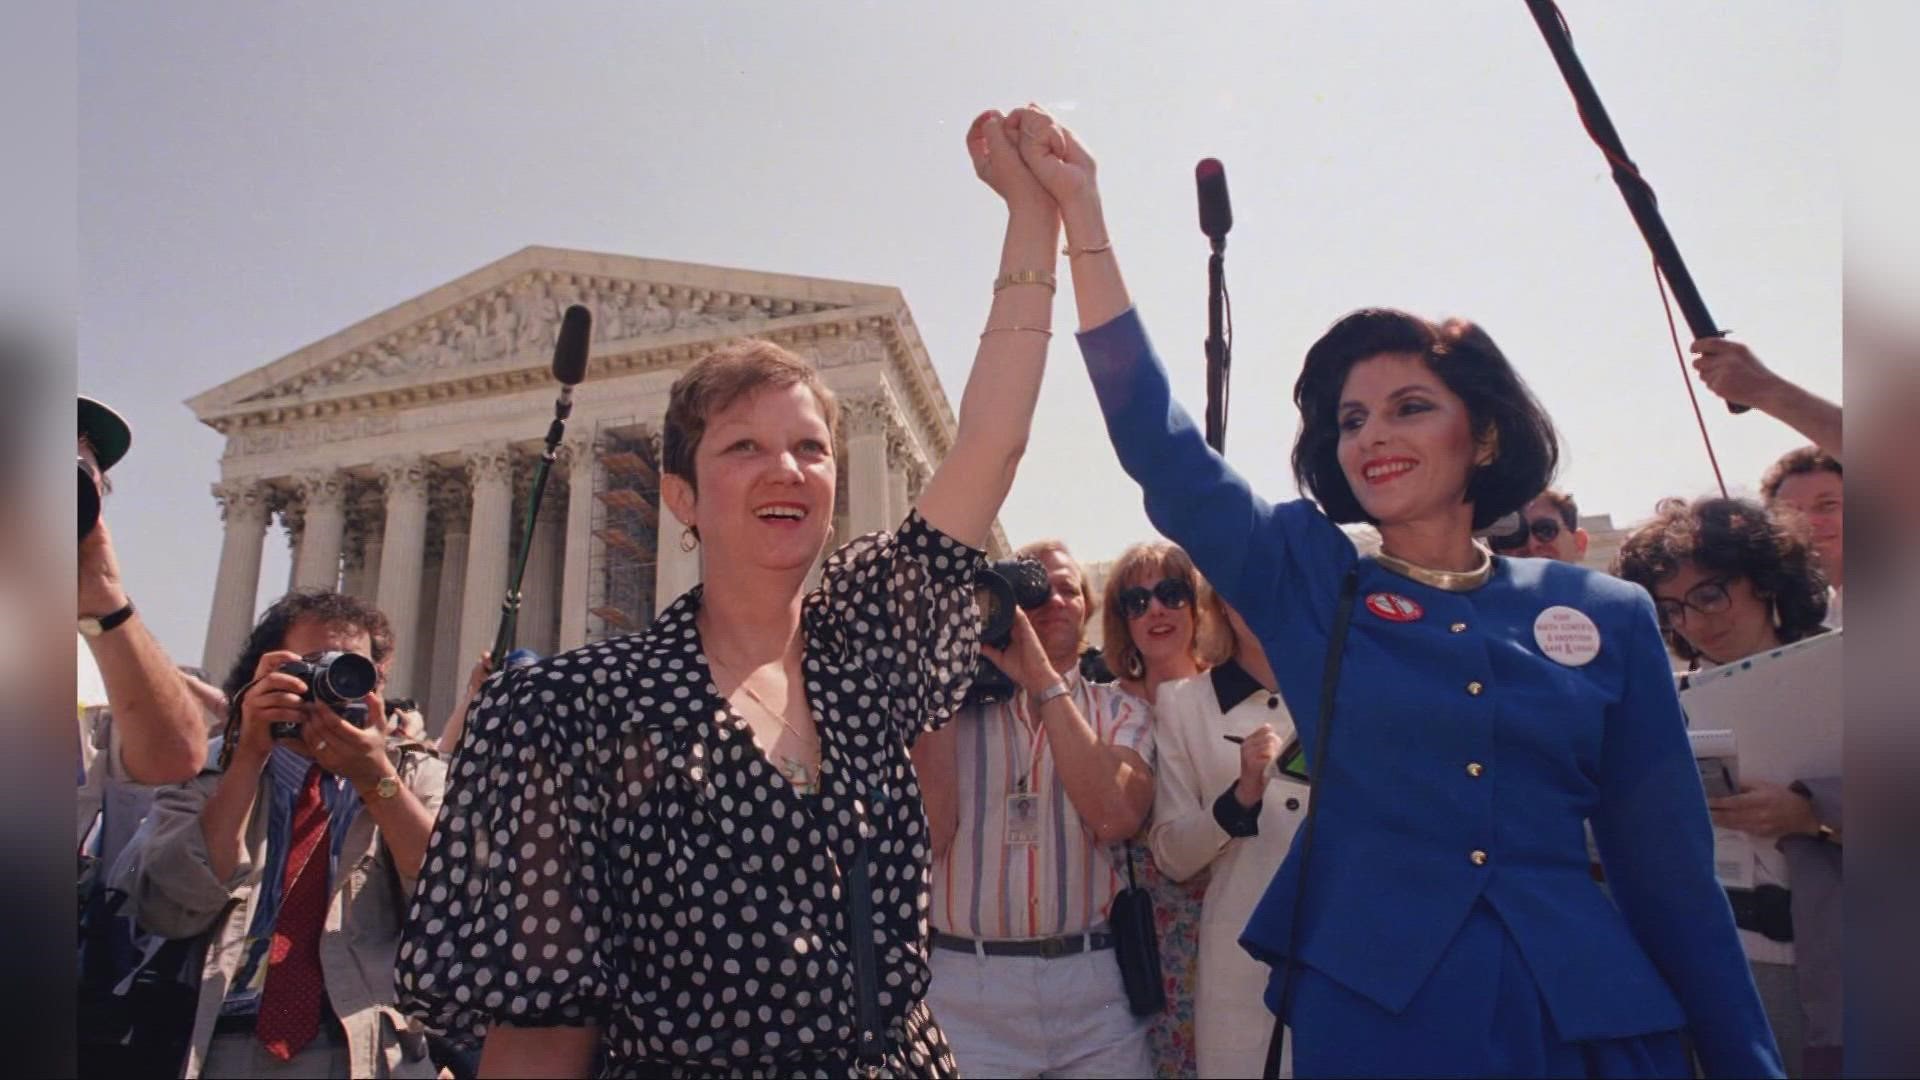 Who was Jane Roe? Jane Roe is a pseudonym for Norma McCorvey, the woman part of the landmark case Roe v. Wade.